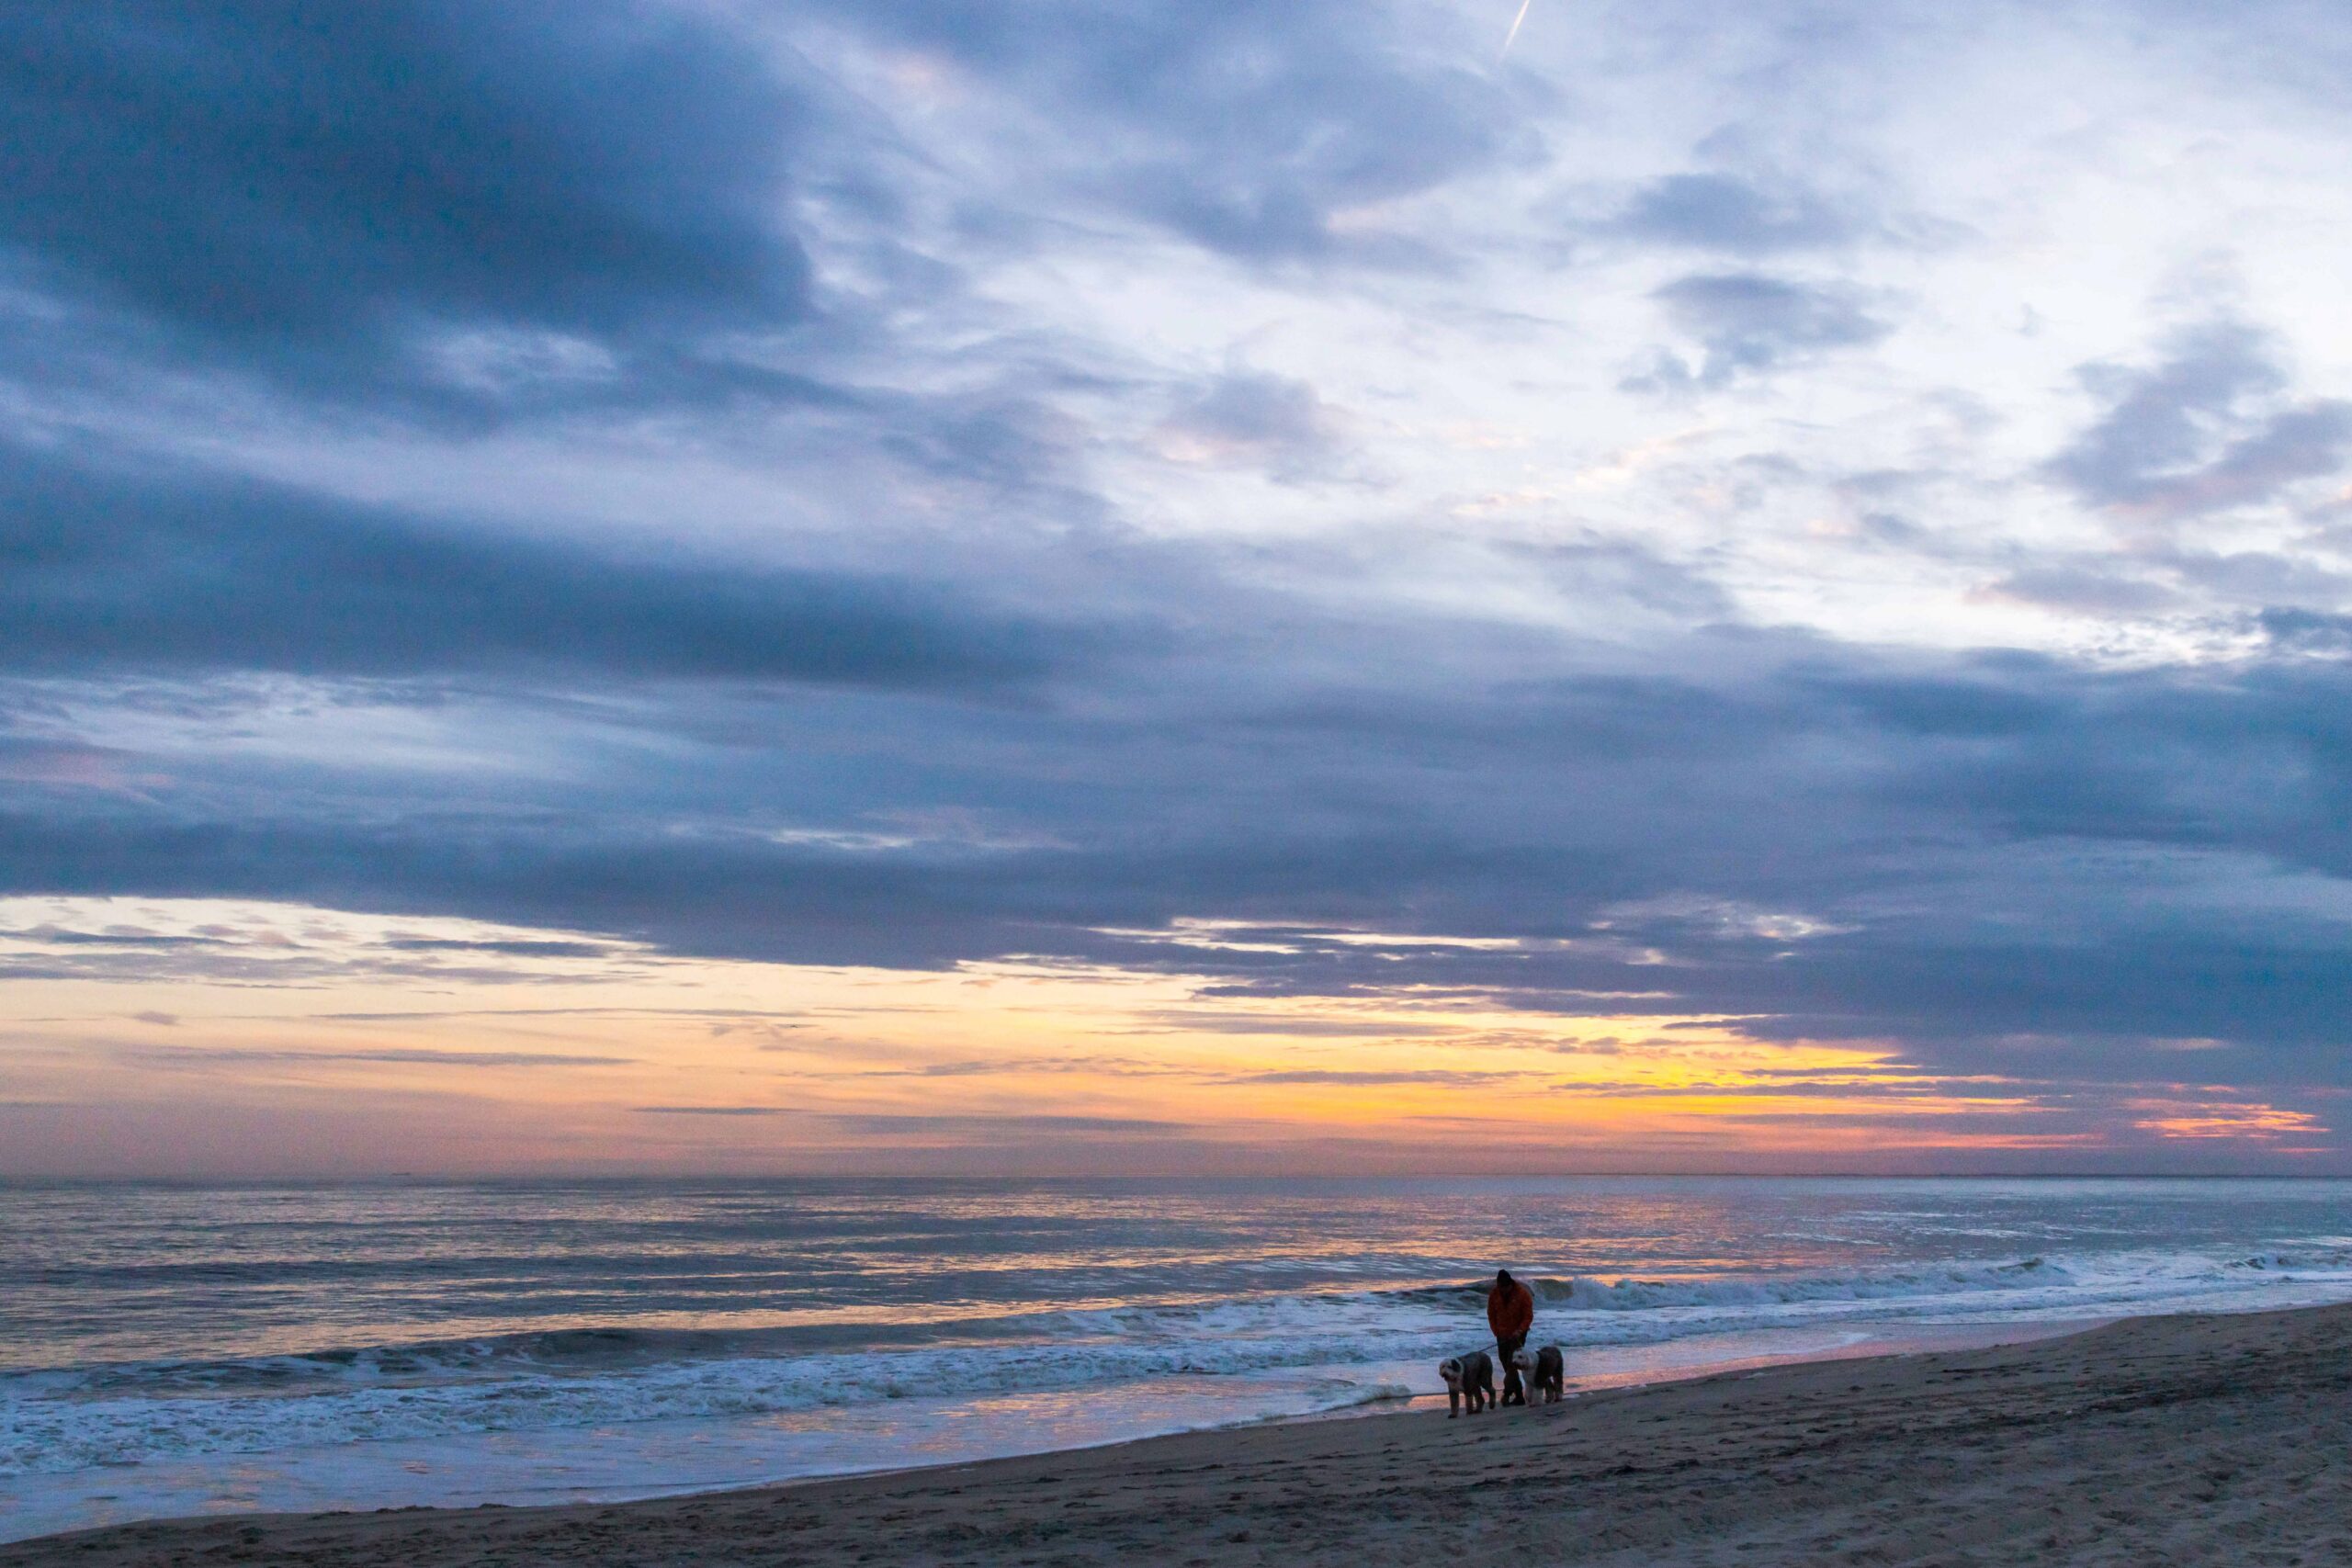 A person walking with two dogs at sunset on the beach with blue clouds in the sky and yellow and pink colors at the horizon